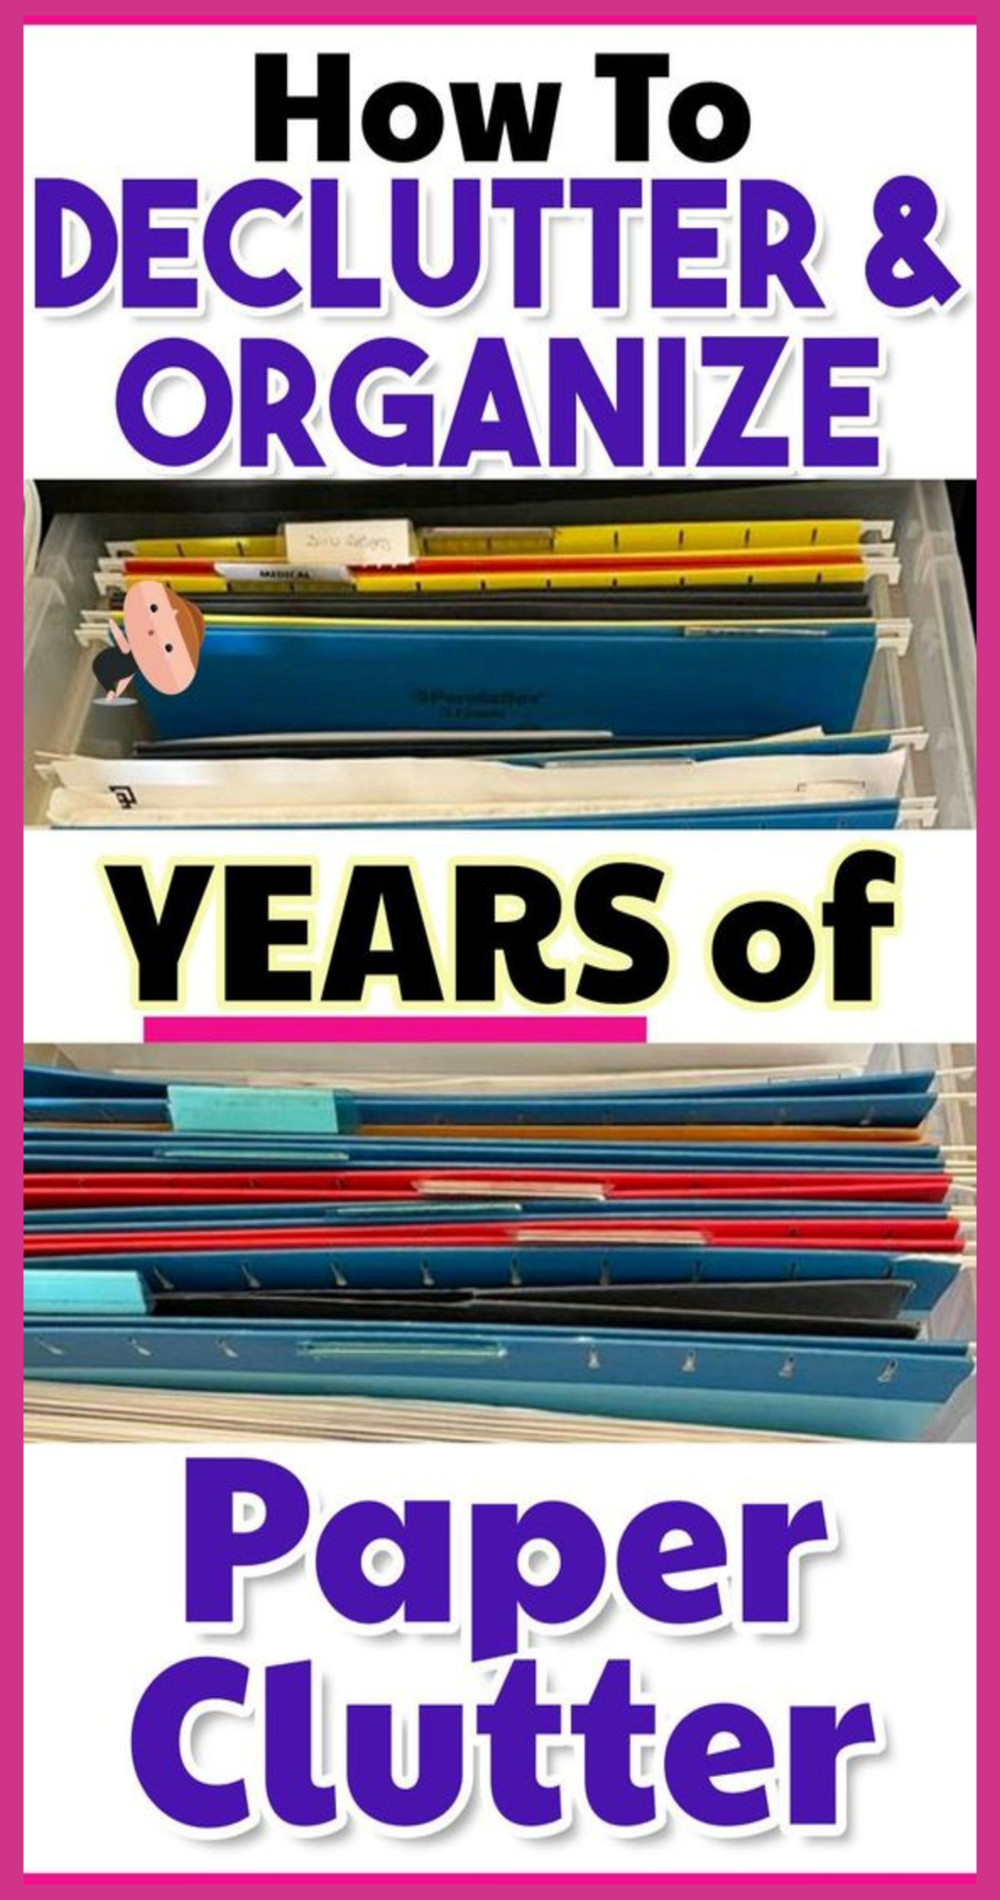 how to declutter and organize years of paper clutter